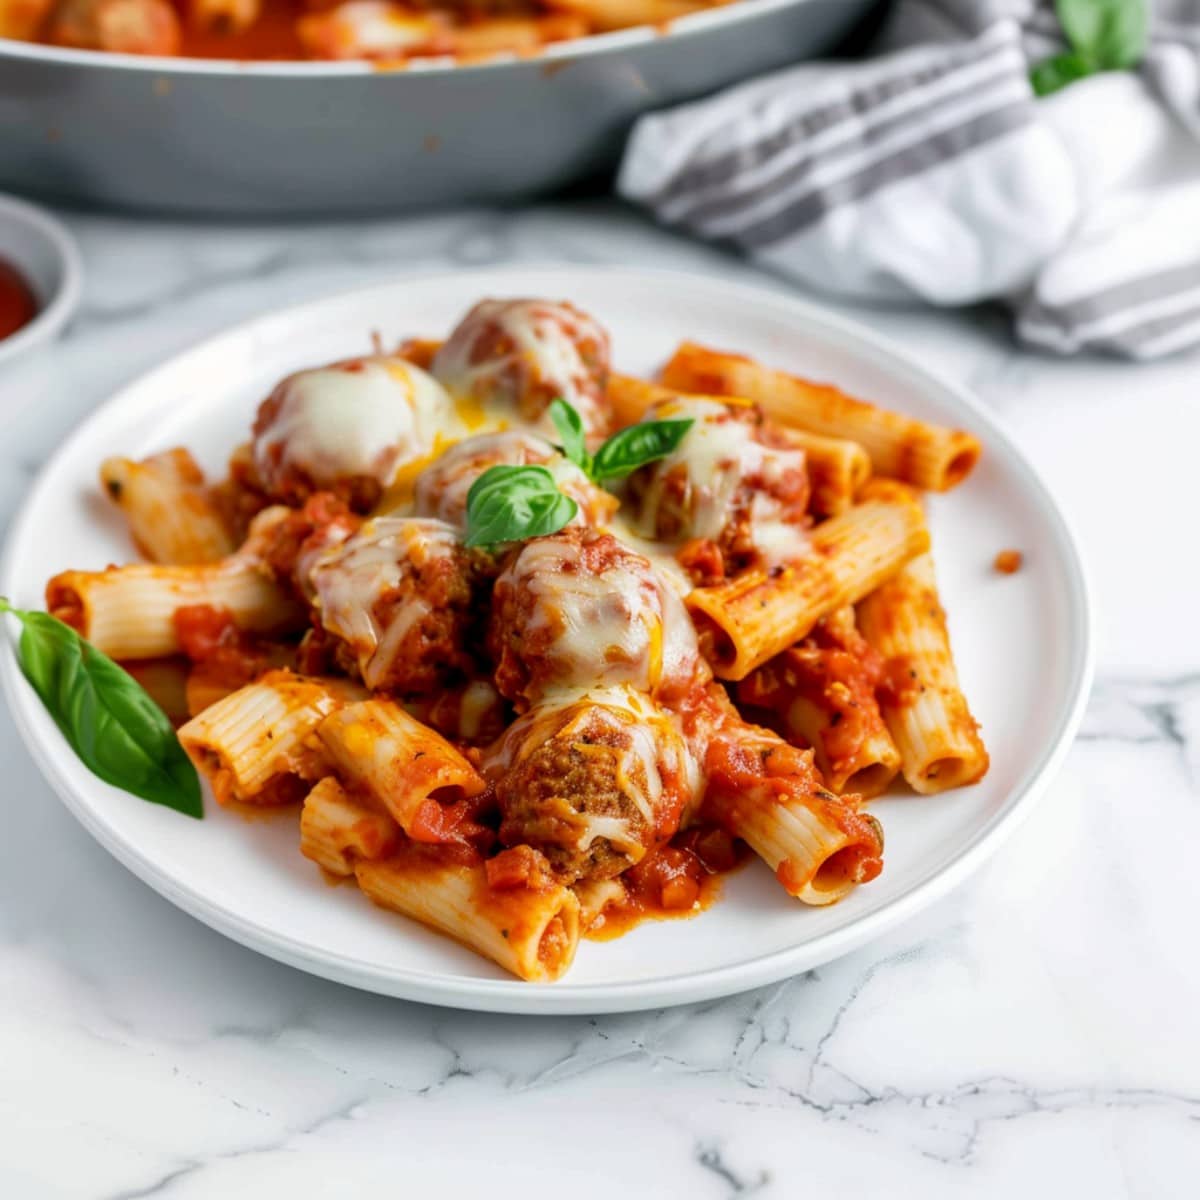 Comforting homemade meatballs and baked ziti pasta with tomato sauce and a hint of mint in a white plate